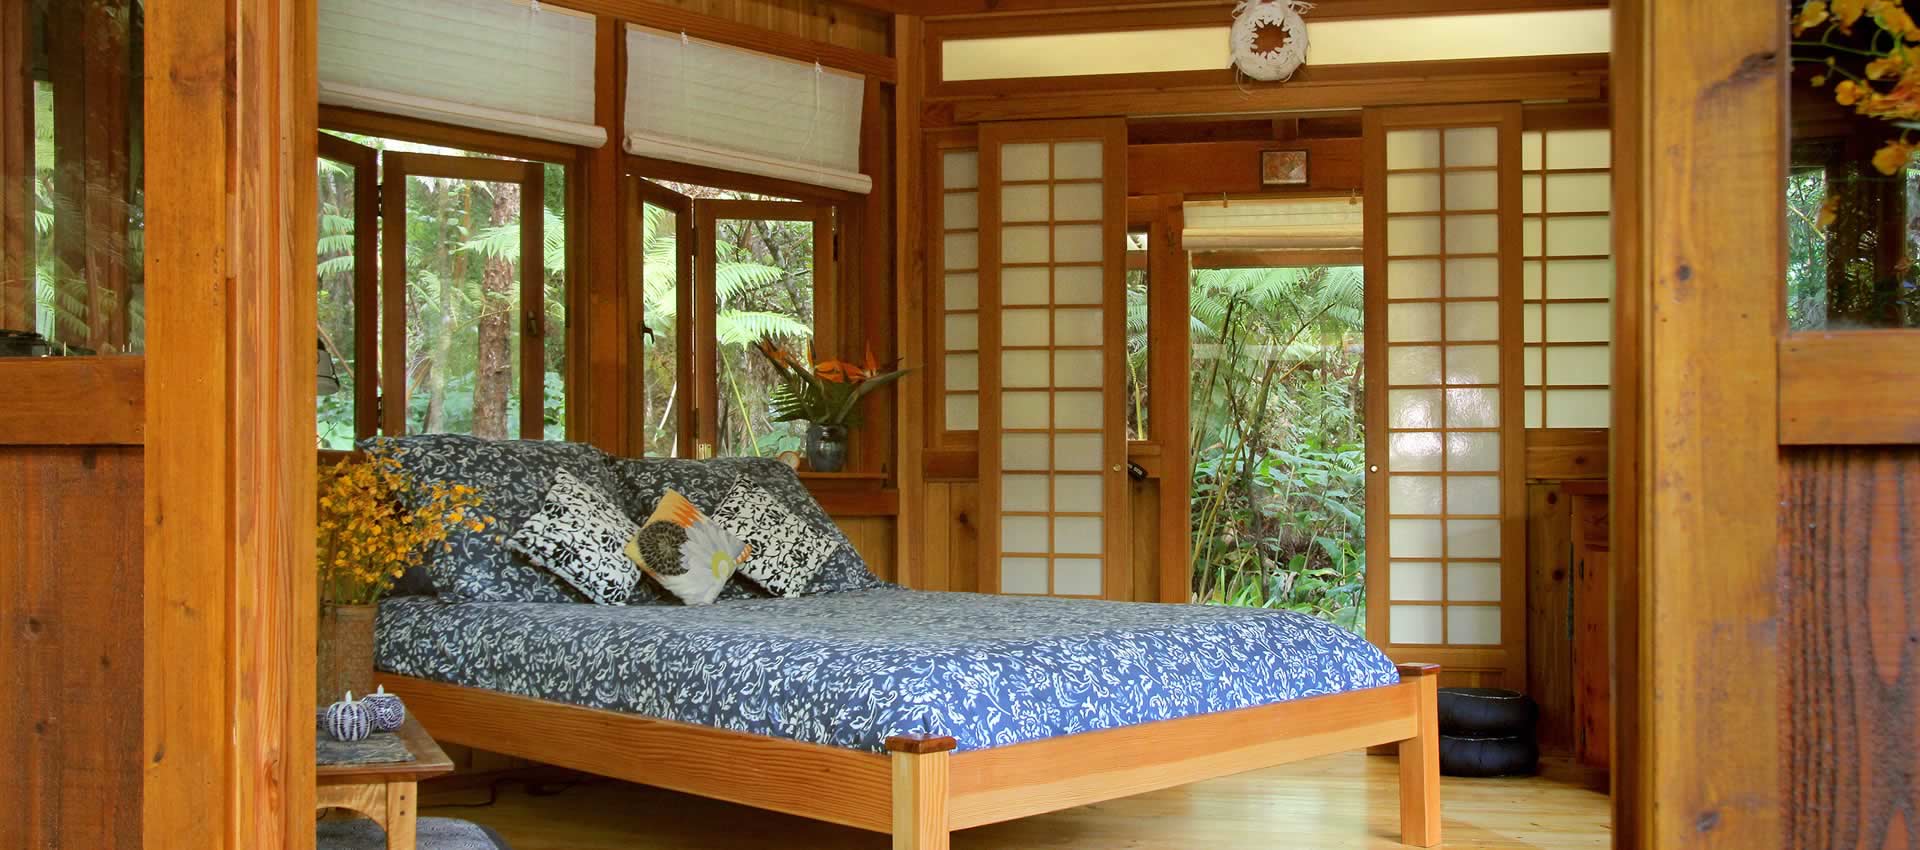 Sanctuary Cottage queen bed with indigo bedding and floor cushions